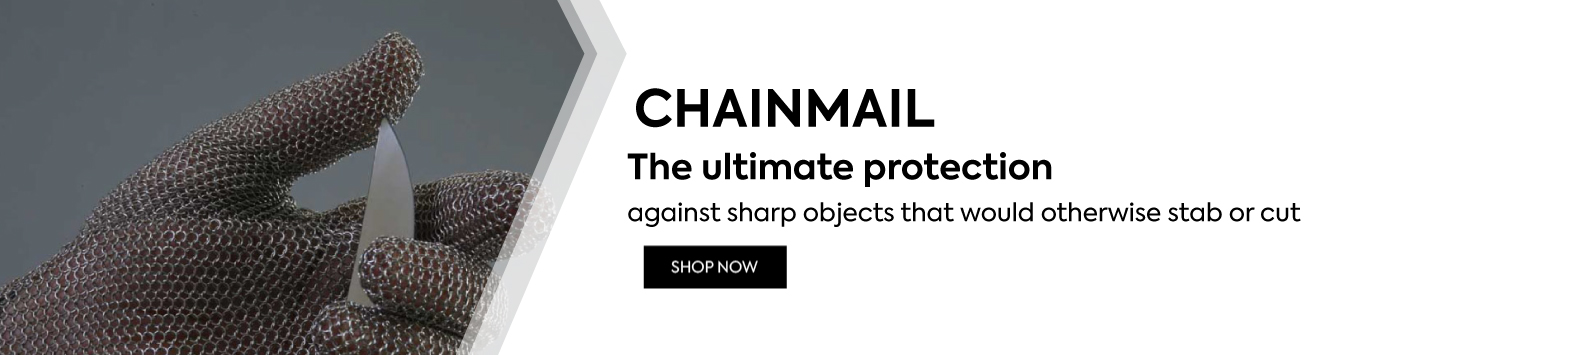 chainmail homepage banner